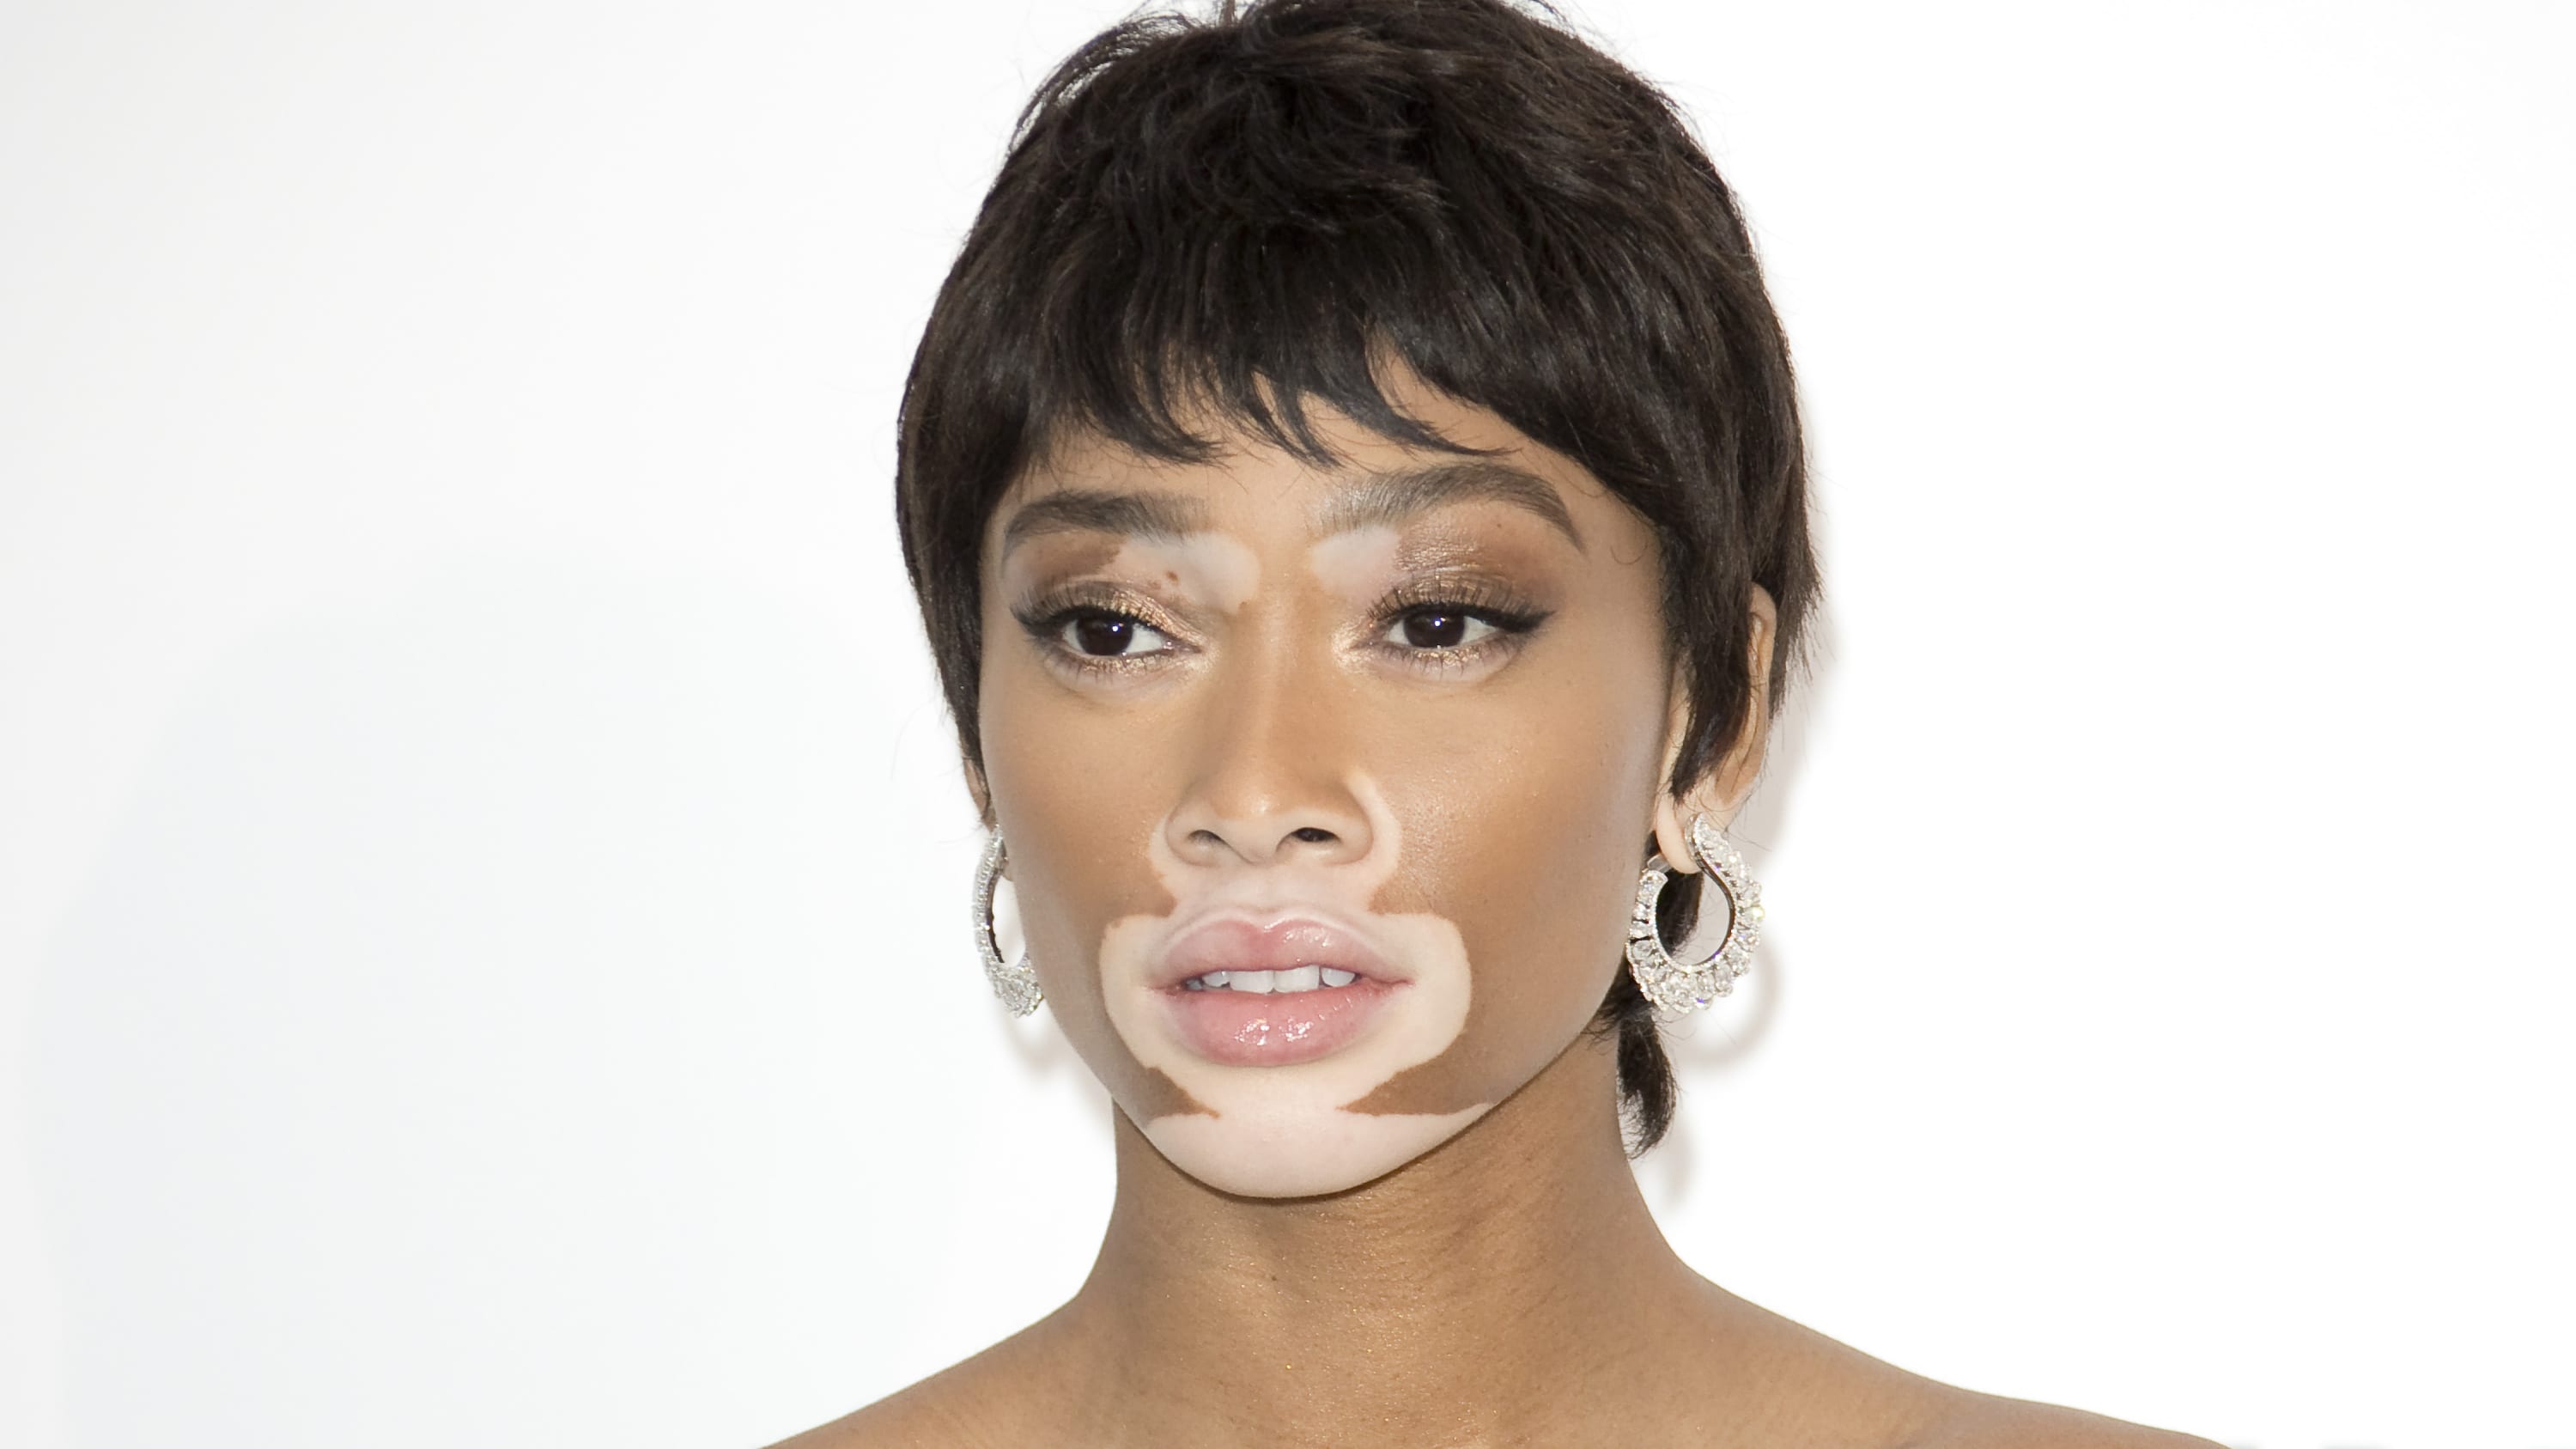 A woman with vitiligo poses for the camera. The vitiligo is a noticeably lighter color than her normal skin color.